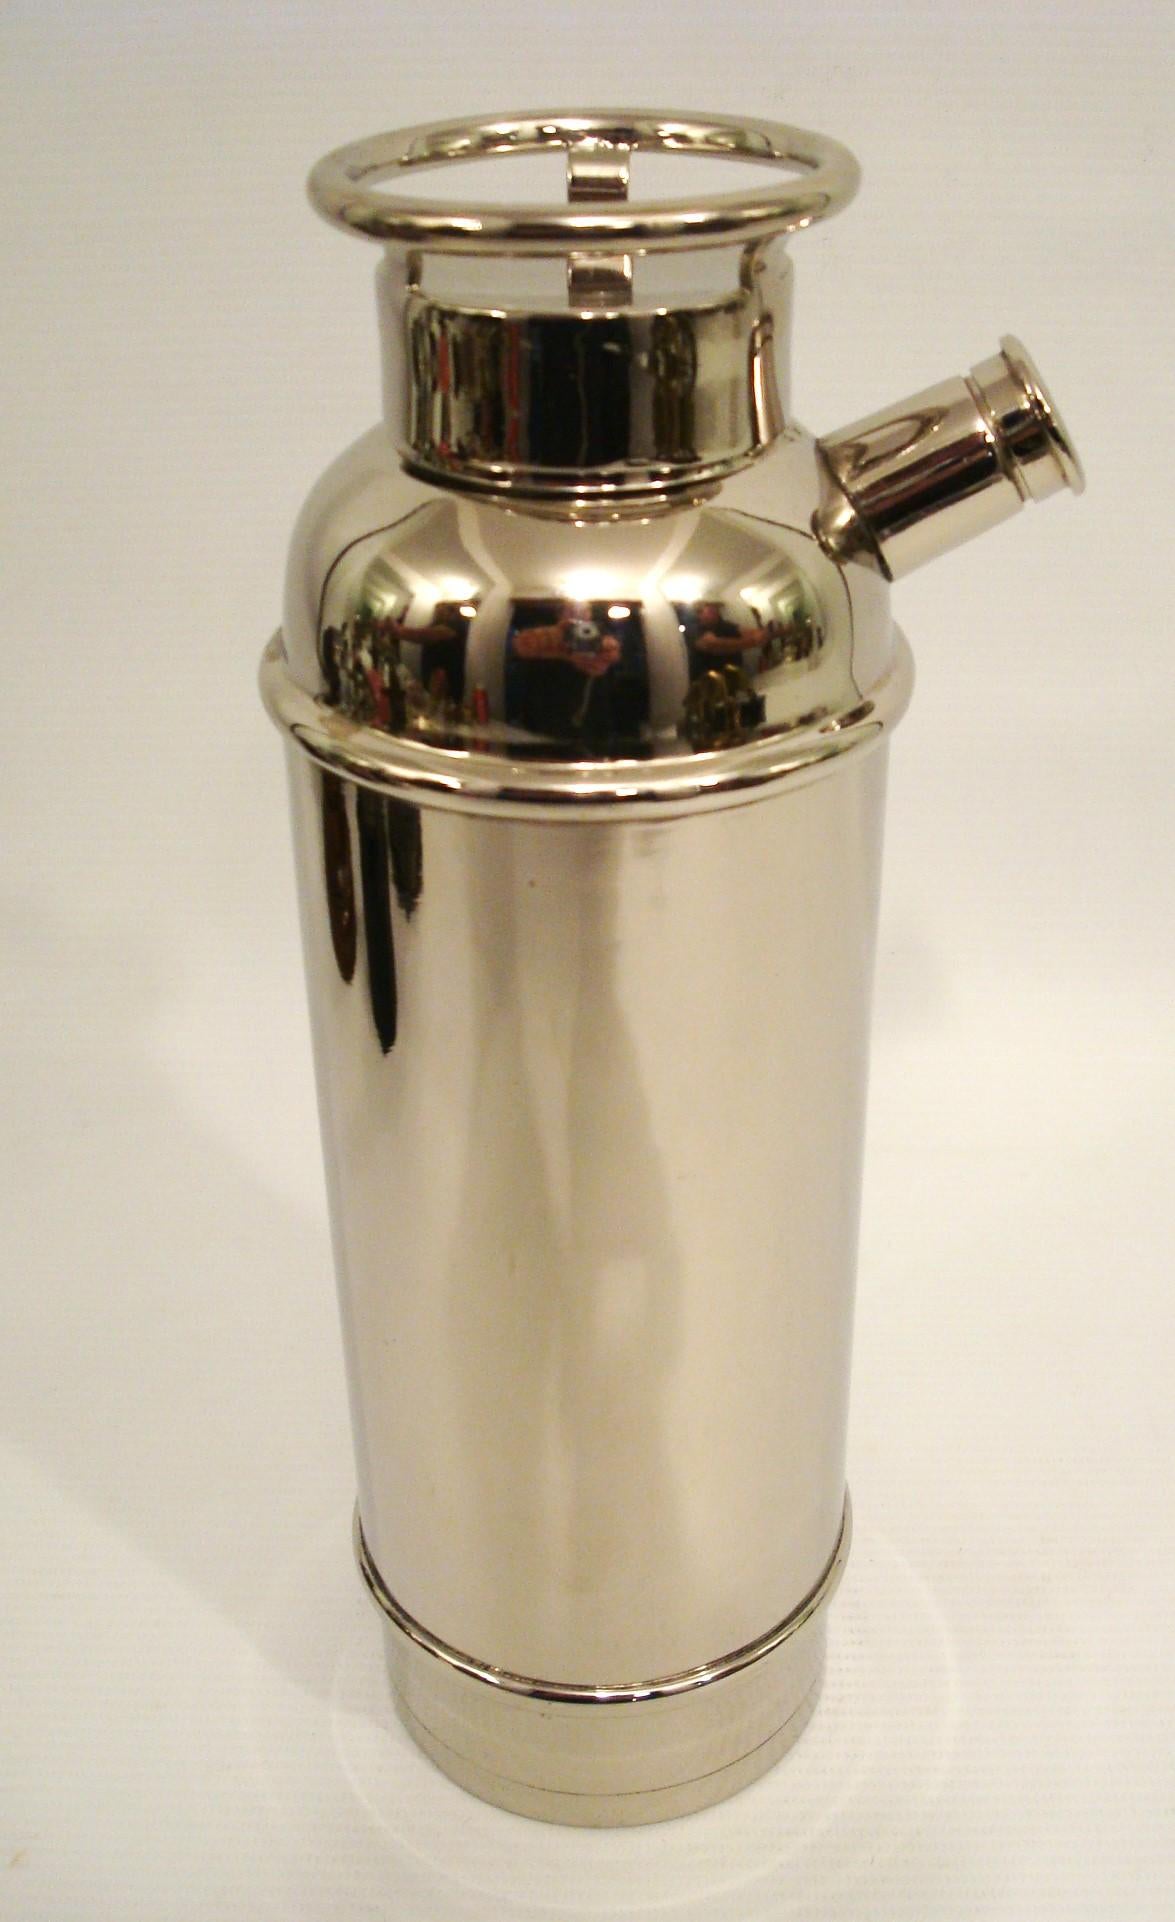 This is a novelty Silvered Fire Extingisher Cocktail Shaker. The wheel top gives access to the body and the knurled end of the spout, which contains a filter, also unscrews for pouring, as shown in the photographs.

Condition: Very good. The plate